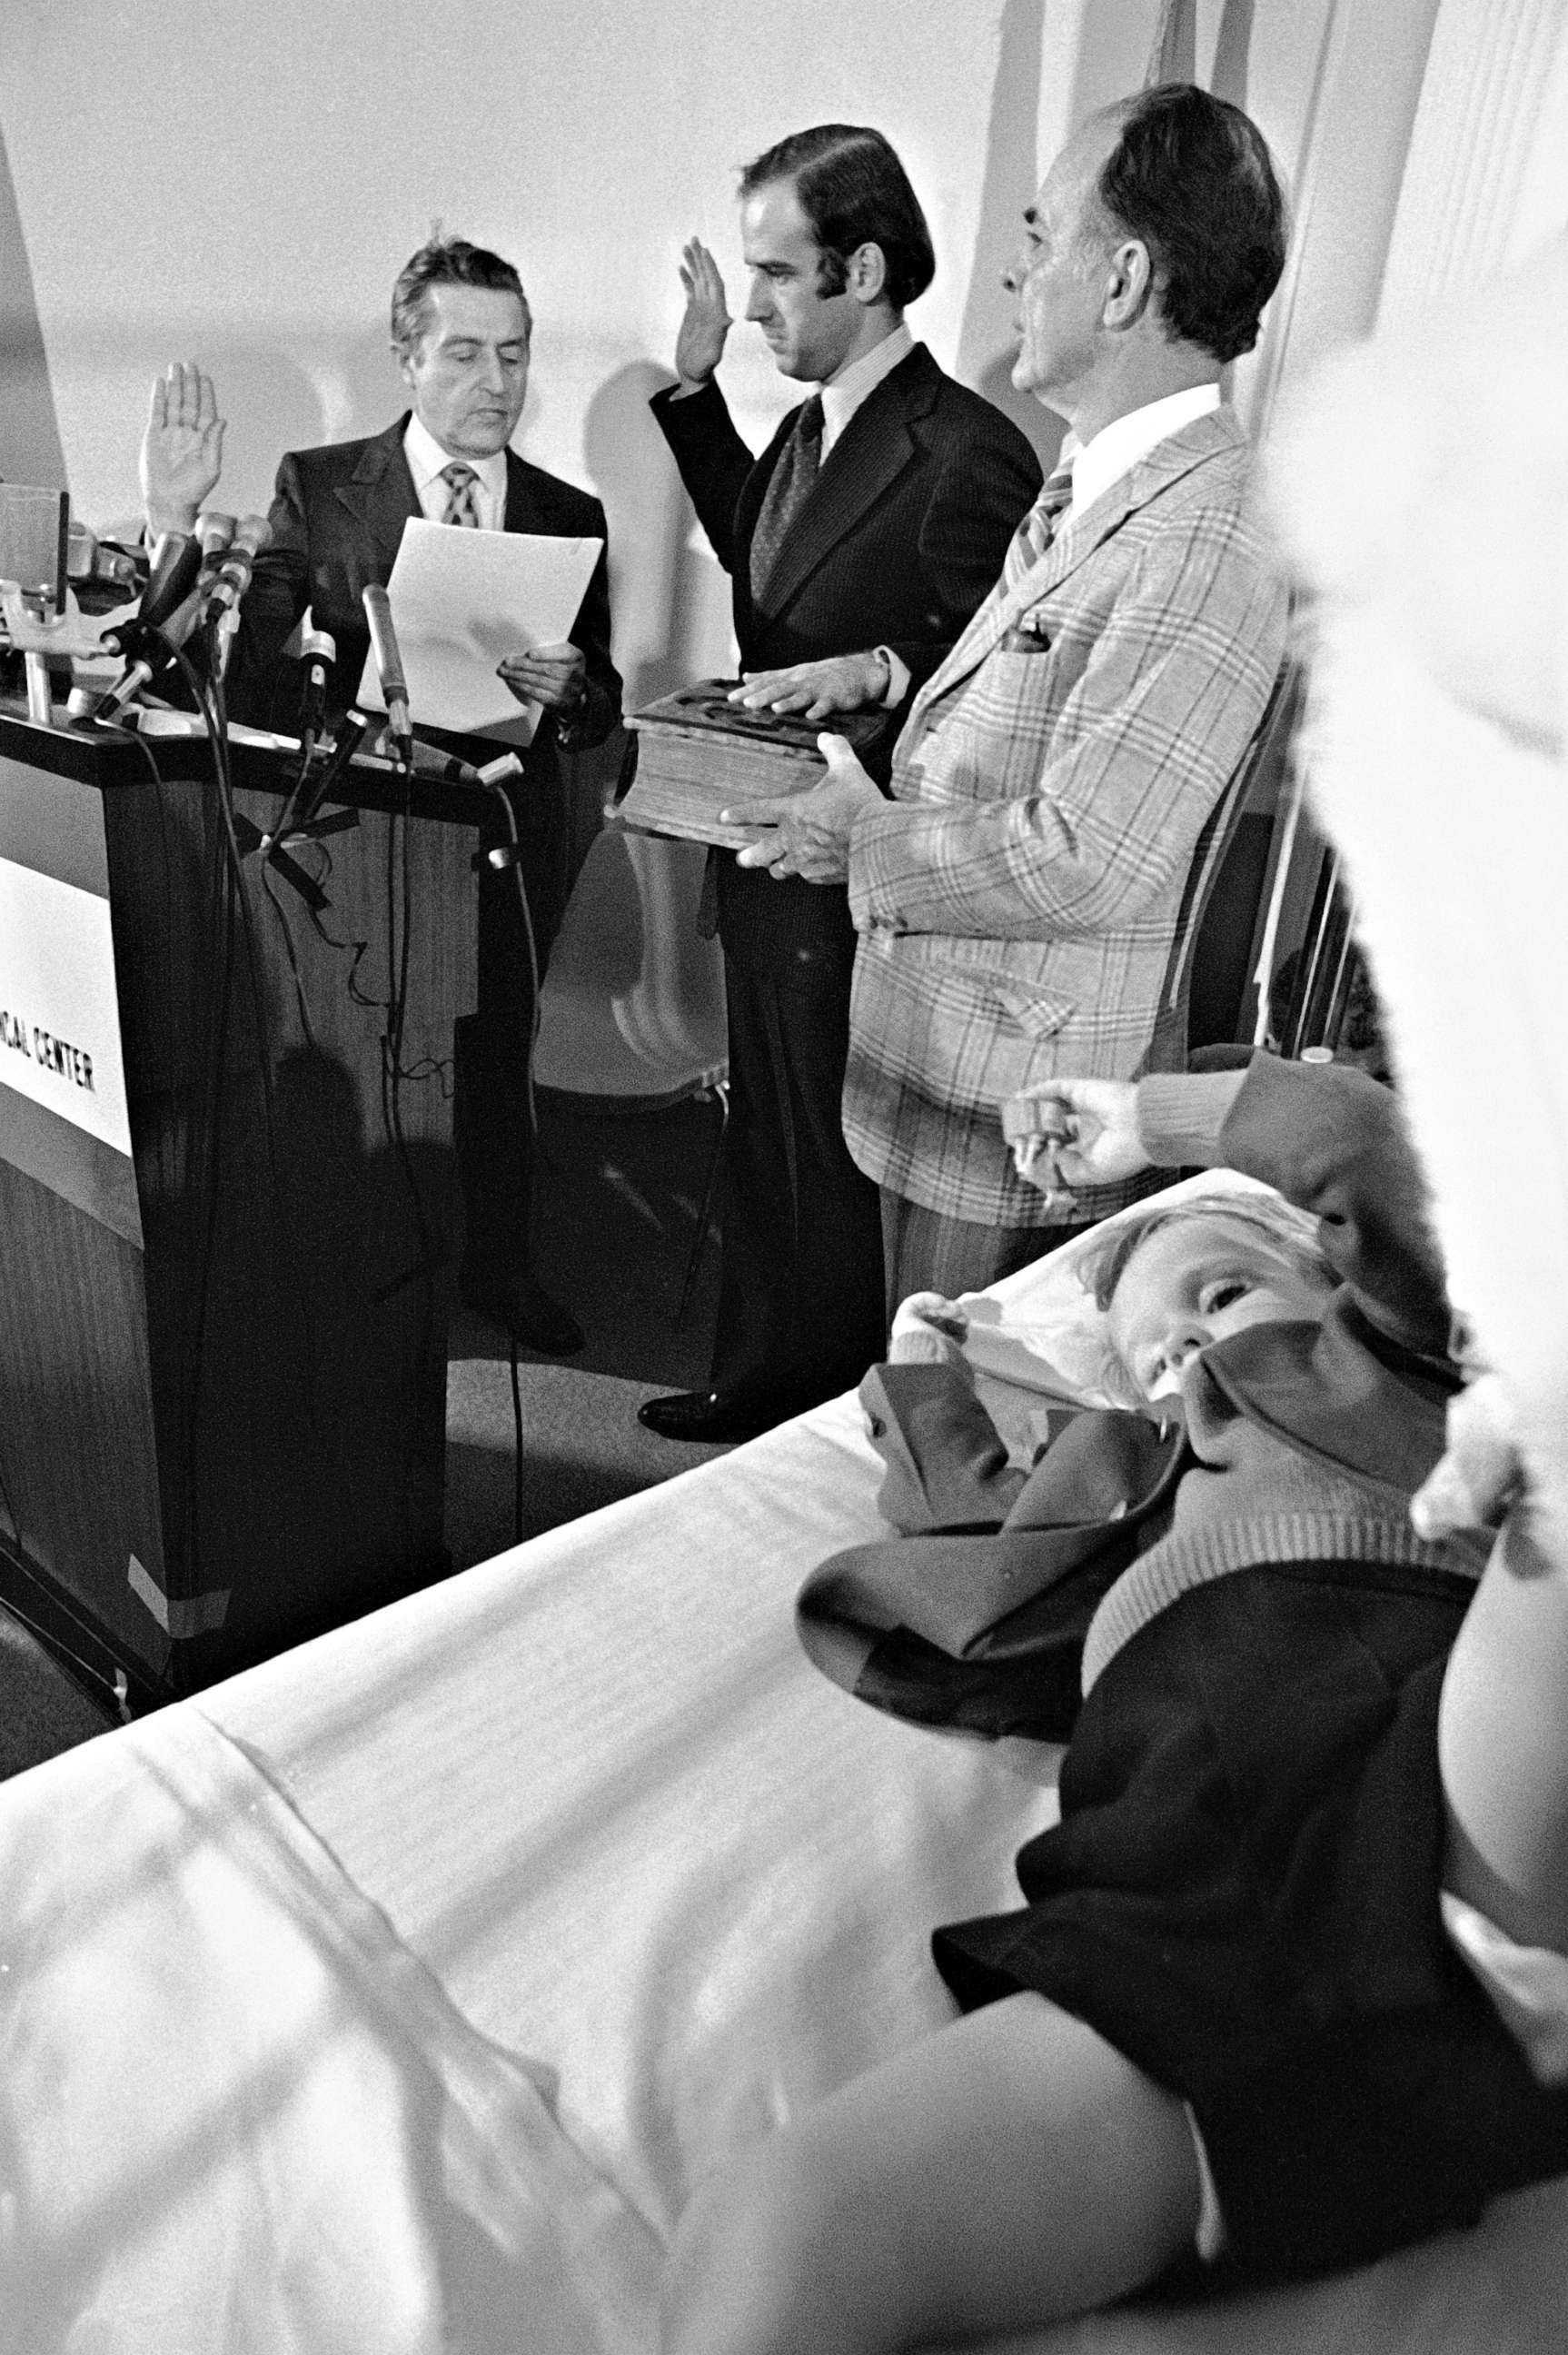 PHOTO: Four-year-old Beau Biden, foreground, watches his father, Joe Biden, being sworn in as the U.S. senator from Delaware by Senate Secretary Frank Valeo, left, in ceremonies in a Wilmington hospital, Jan. 5, 1973.